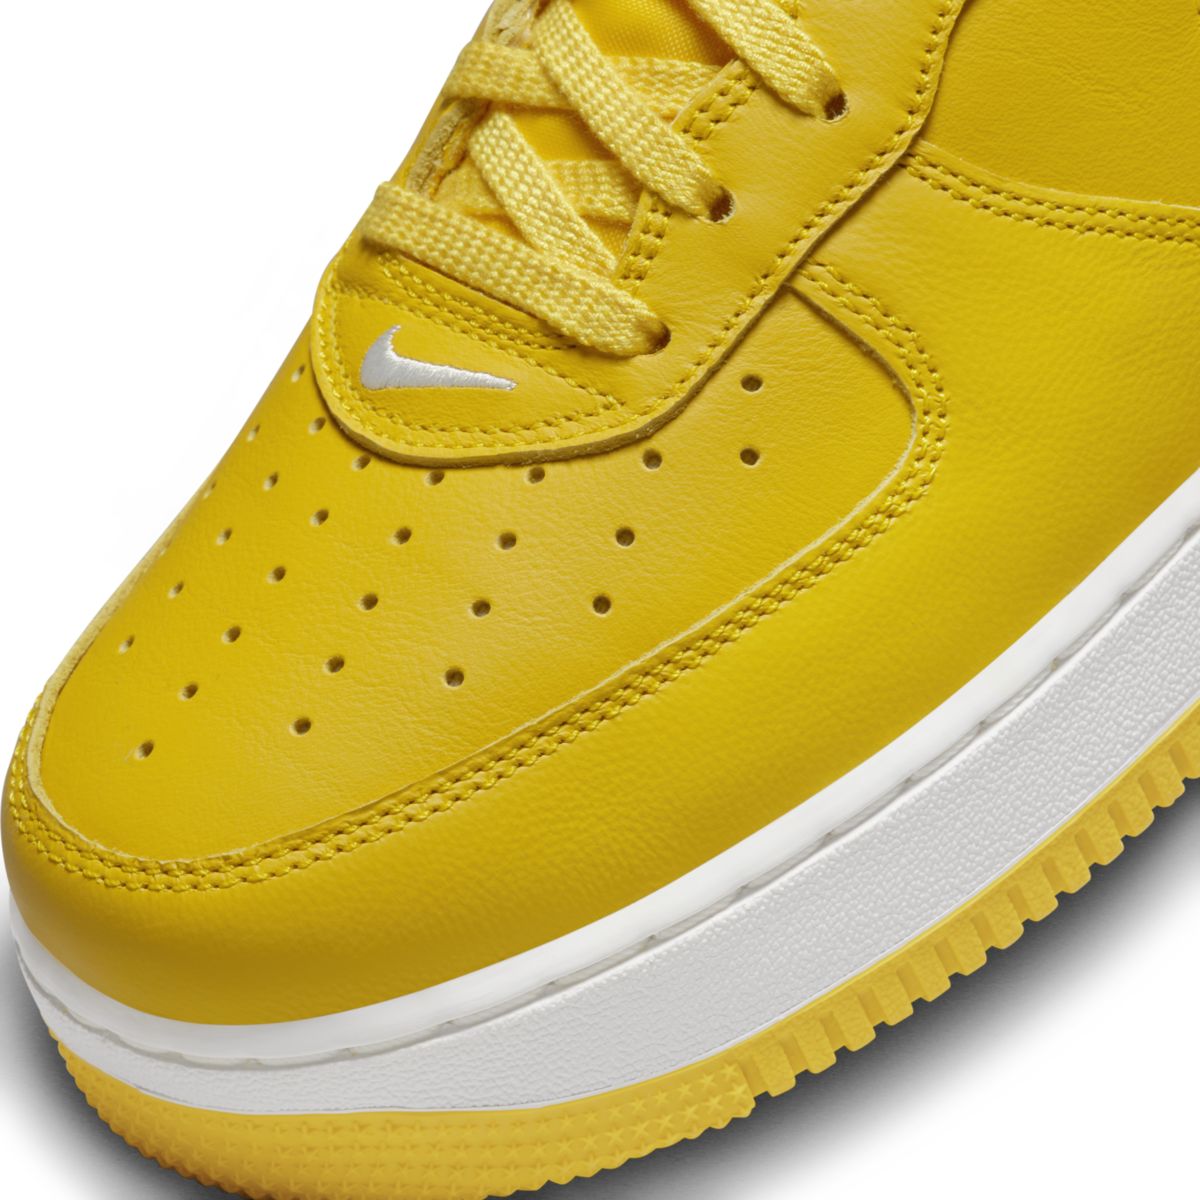 Nike Air Force 1 Low Yellow Jewel Color of the Month FJ1044-700 7